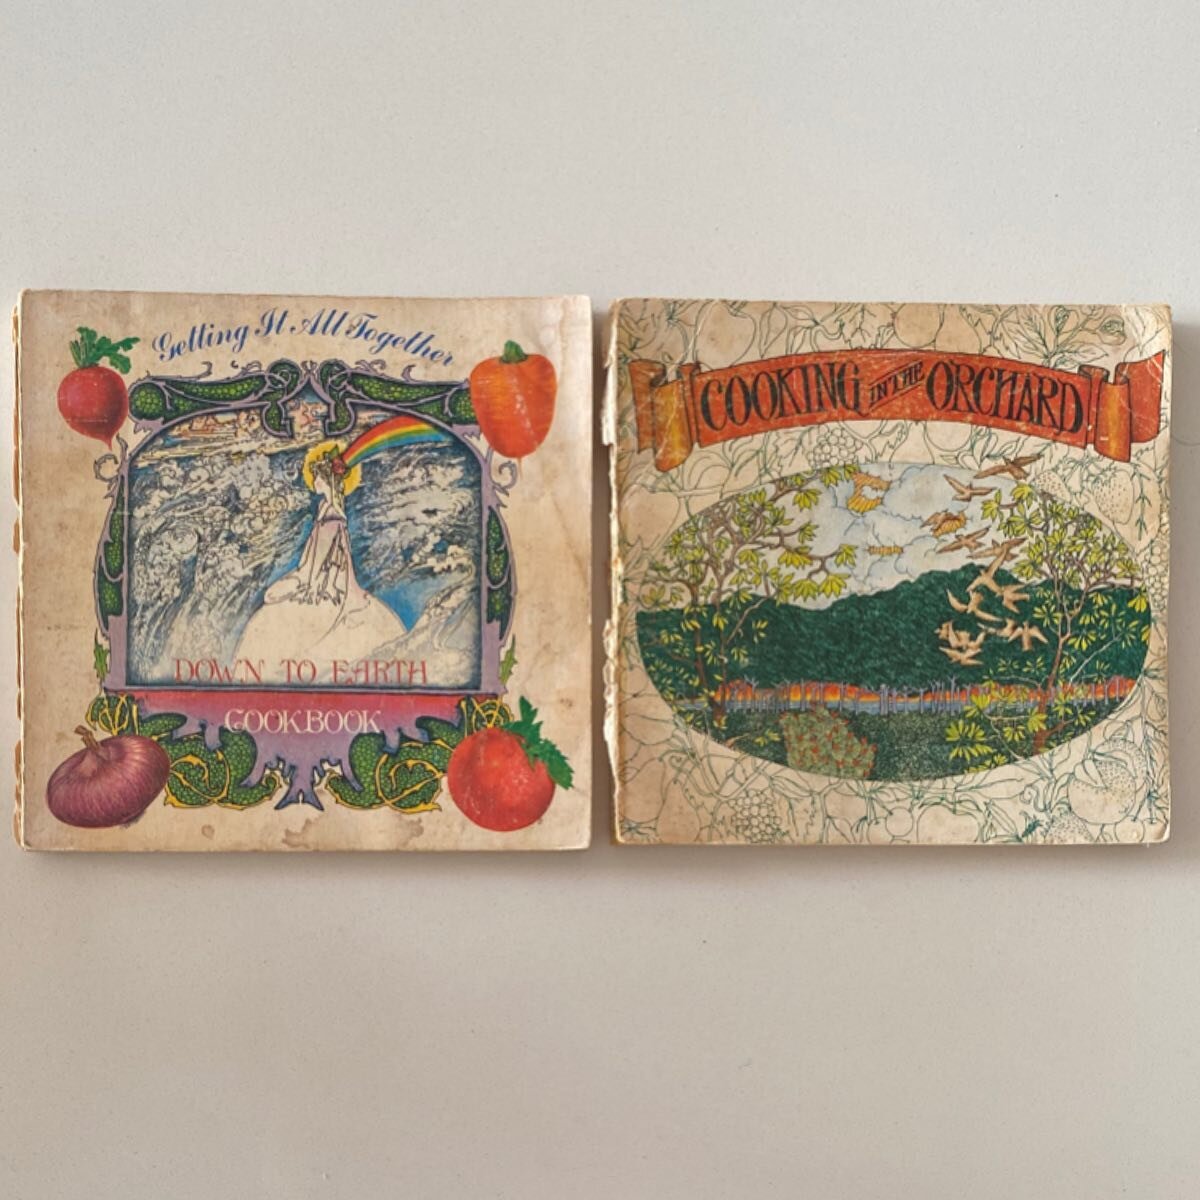 Digging out some comforting classics from the cook book stash in search of meal inspiration. This amazing pair, first published in 1971 and 1972 (no kidding), offer earthy tips and quirky recipes. Published by Gala Books of Laguna Beach CA, the cover